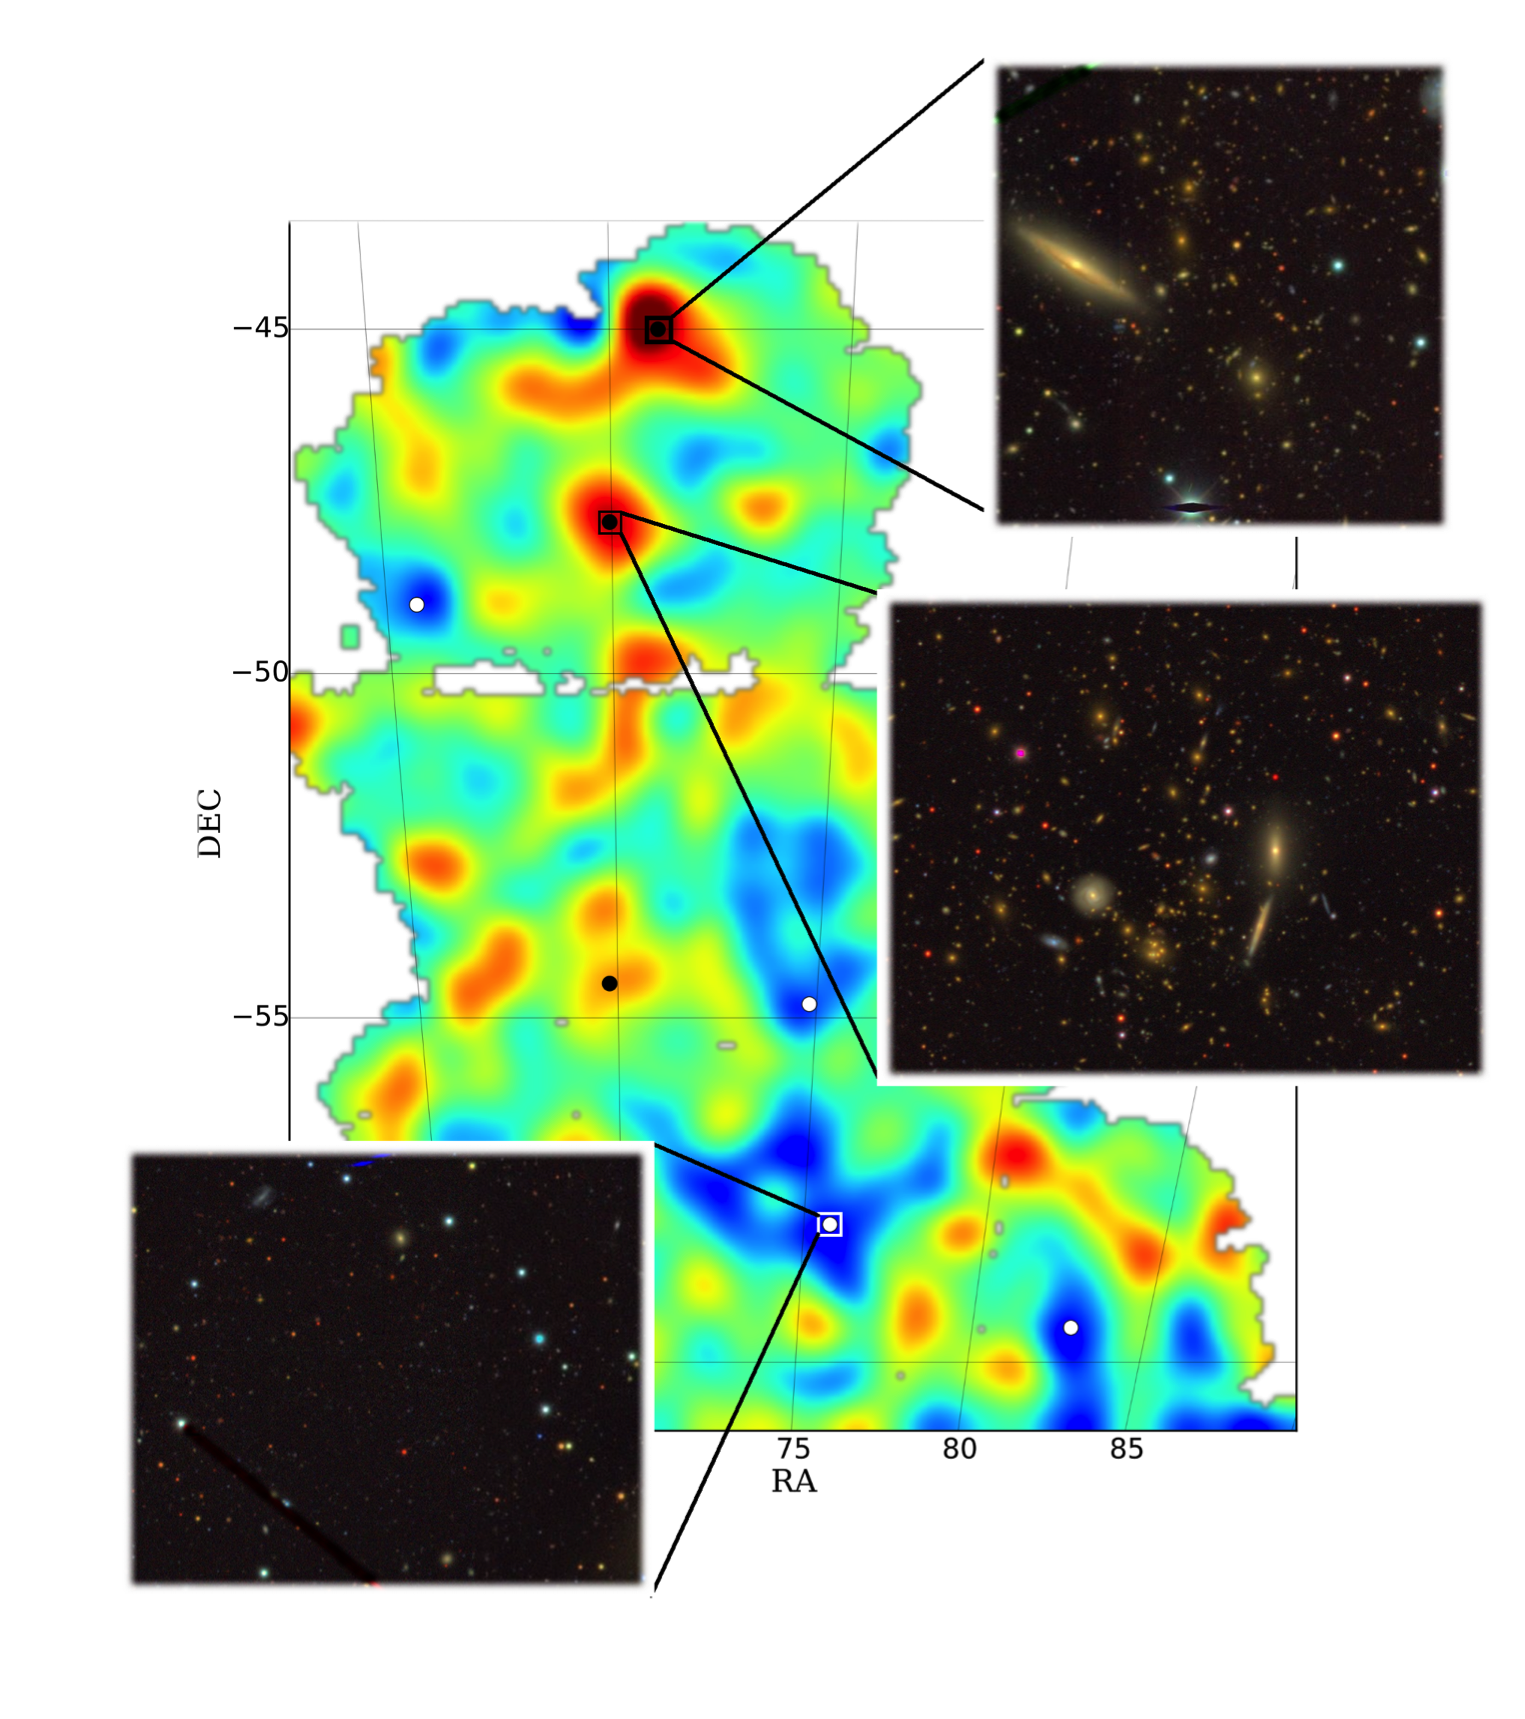 Dark matter graphic with three detailed zoomed-in images overlaid